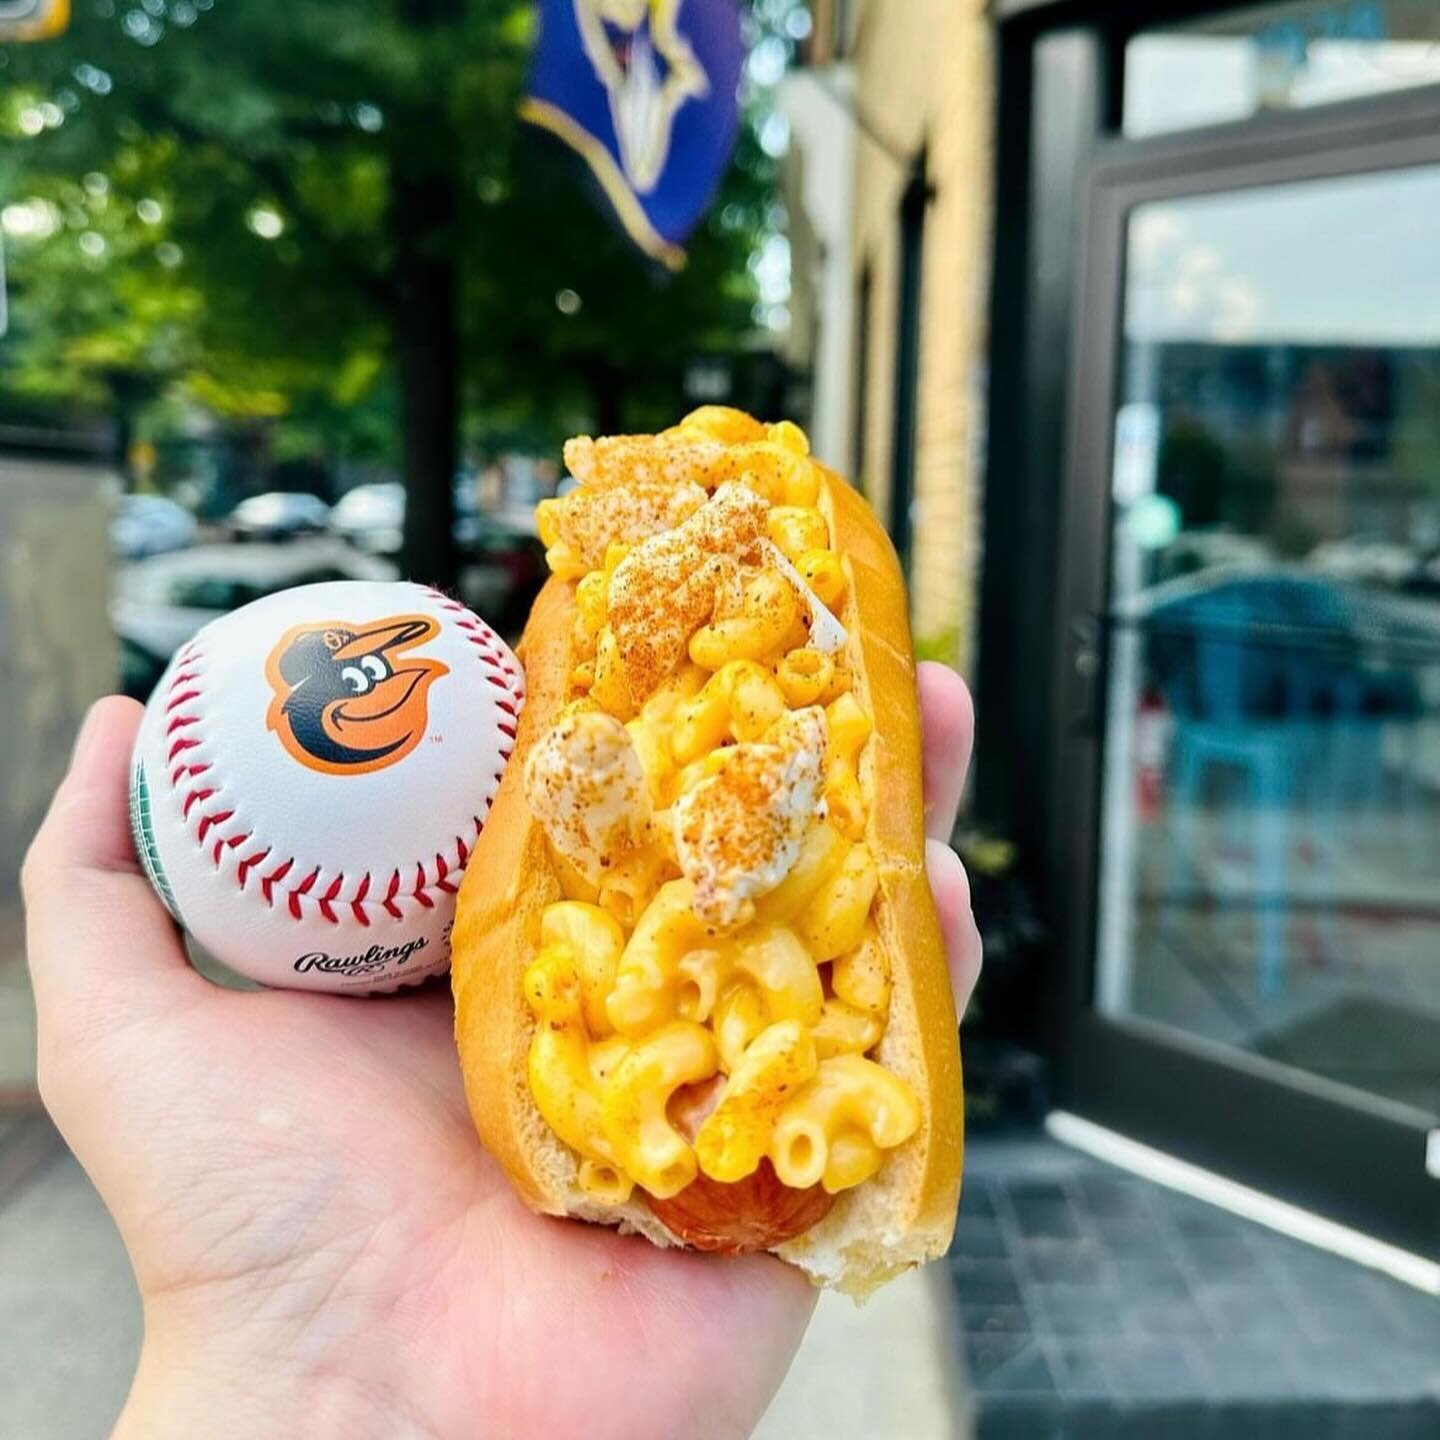 Let&rsquo;s Go O&rsquo;s! It&rsquo;s Opening Day and we are ready in Fell&rsquo;s Point! ⚾️🧡 #fellspointmainstreet #fellspoint #baseballseason #neighborhood